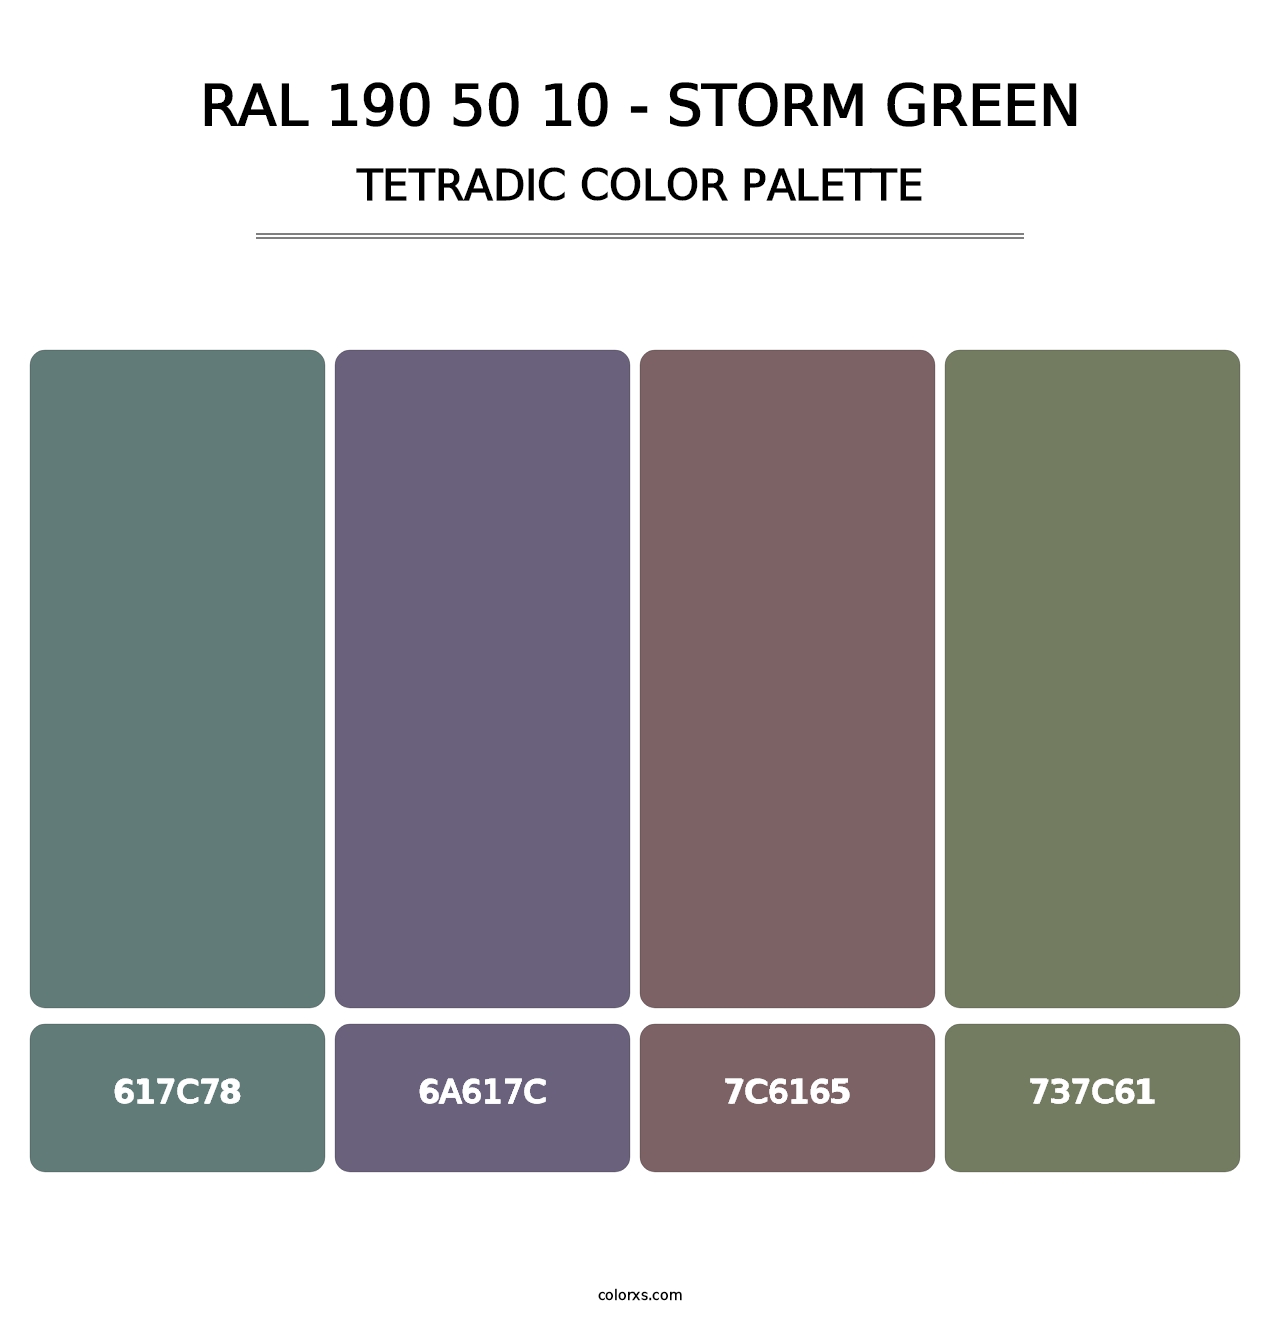 RAL 190 50 10 - Storm Green - Tetradic Color Palette